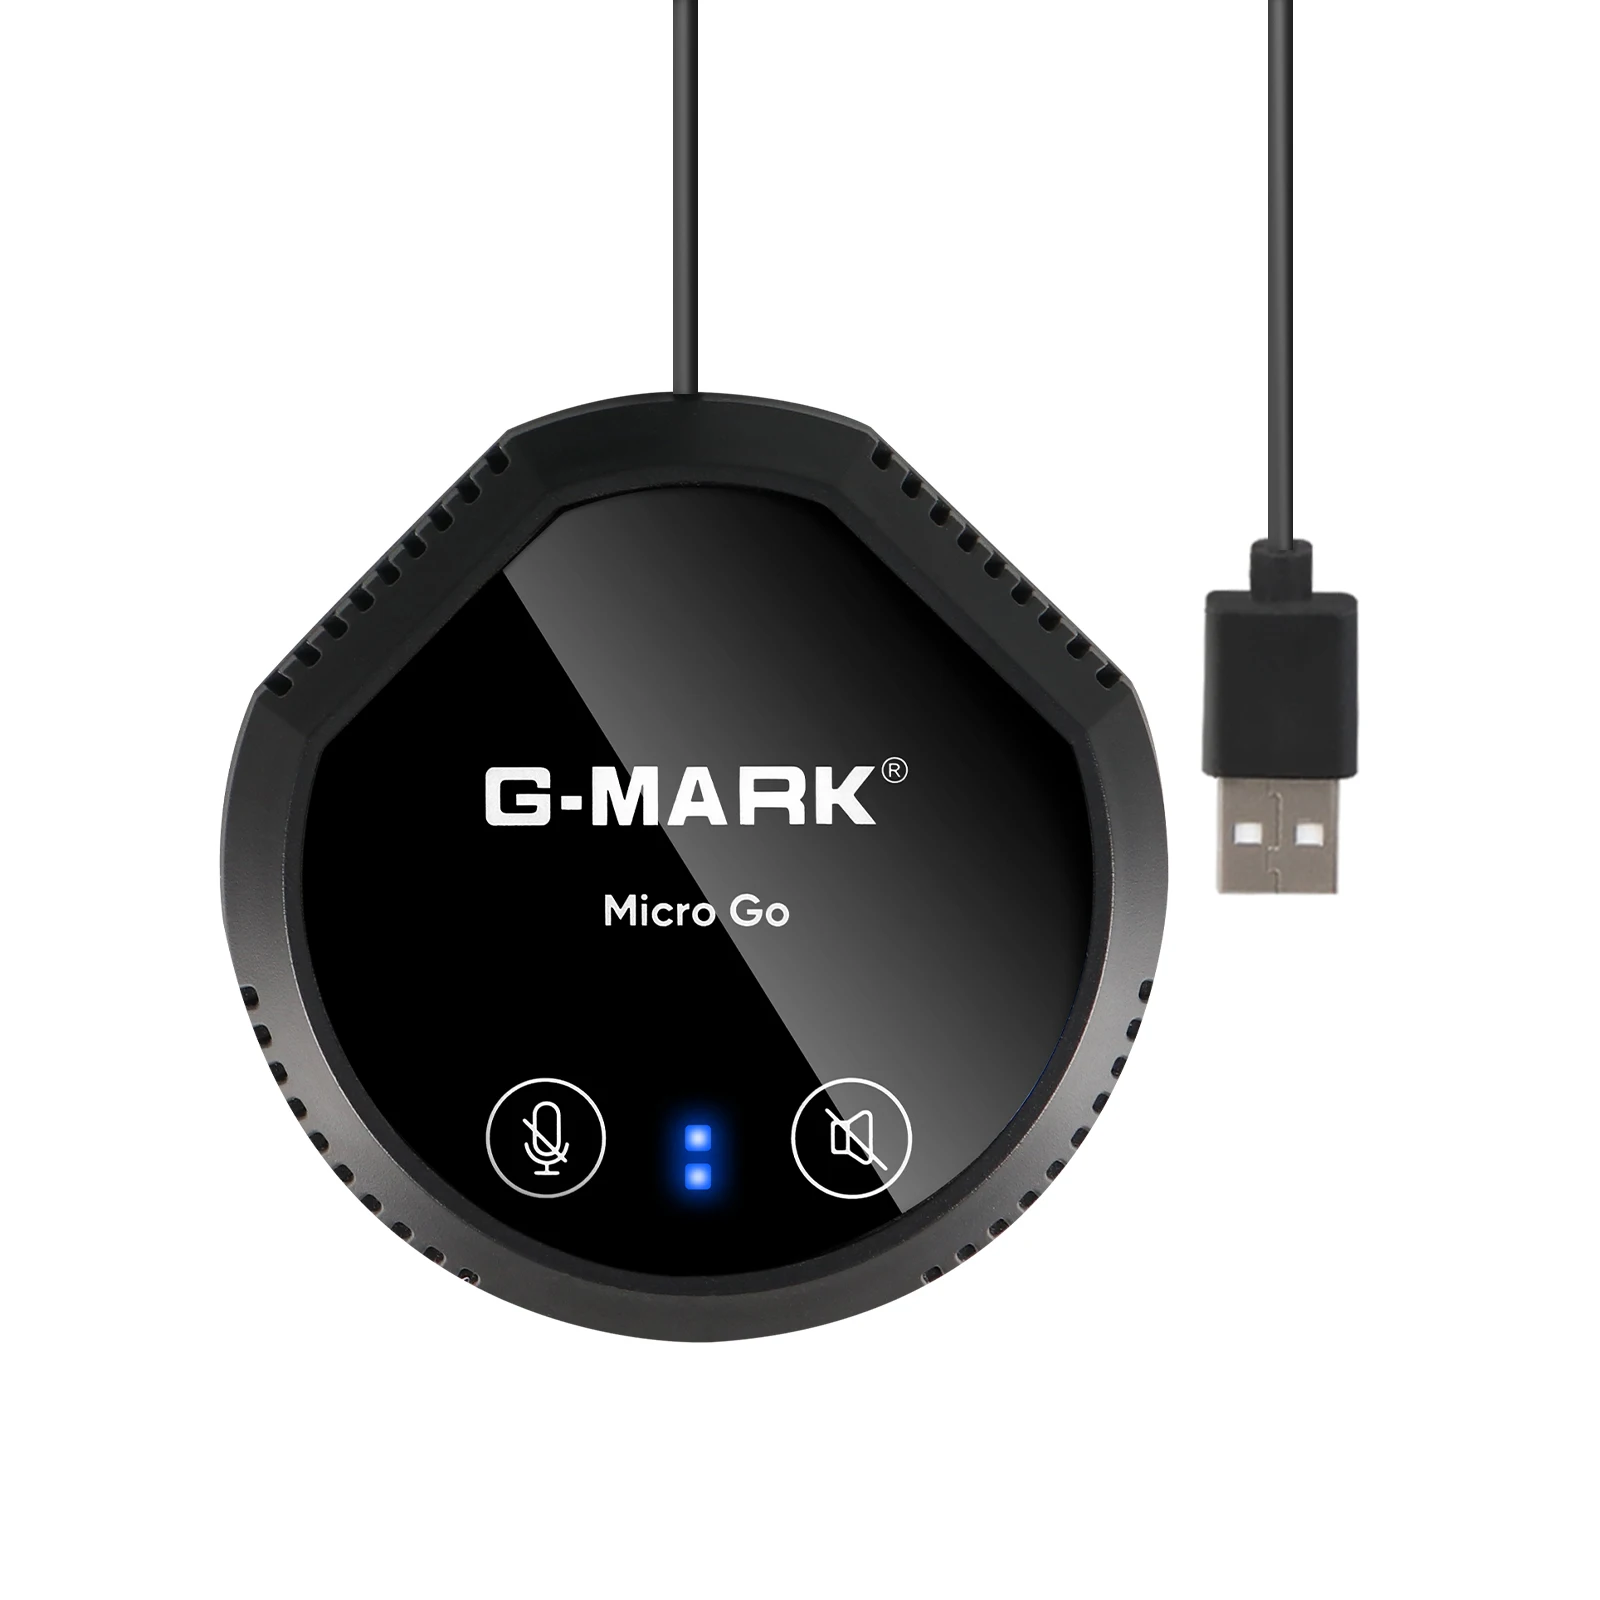 USB Speakers With Microphone G-MARK Micro Go Bluetooth Conference Speakerphone Compatible For Computer Plug and Plays